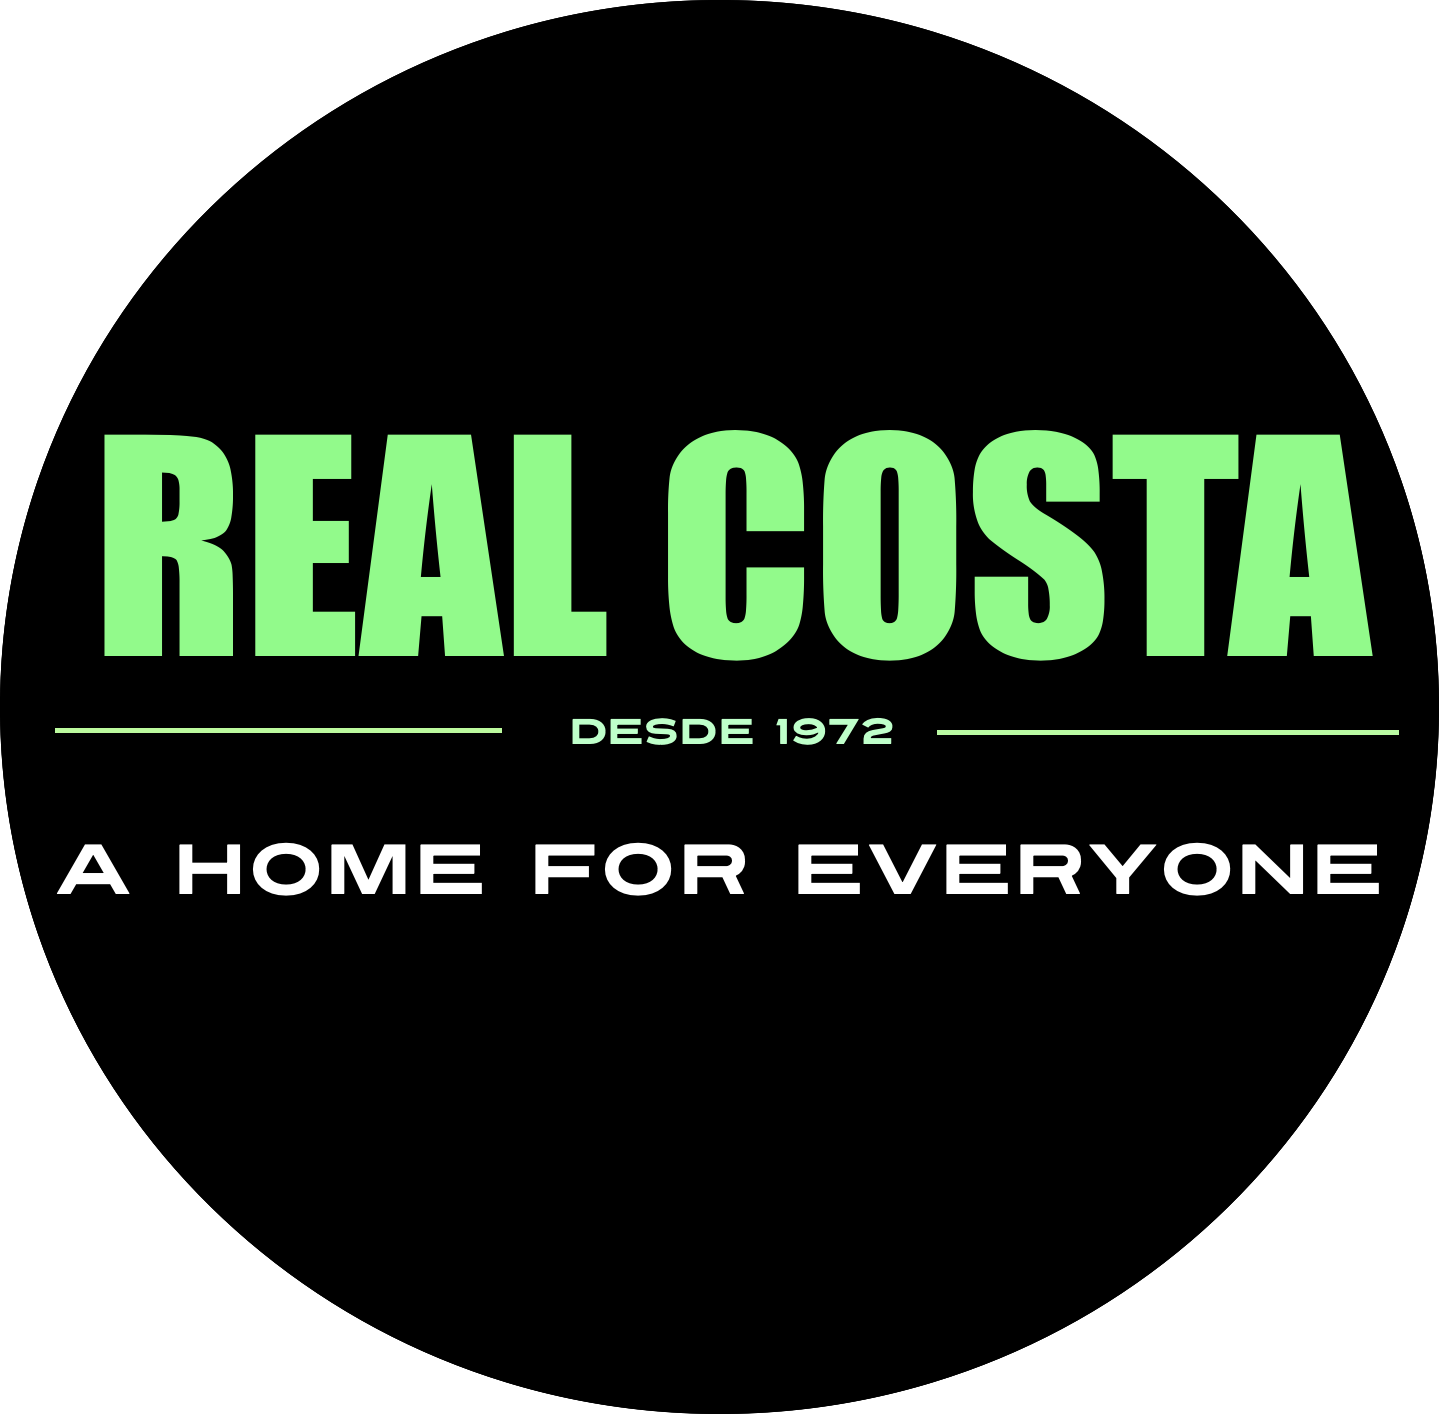 REAL COSTA